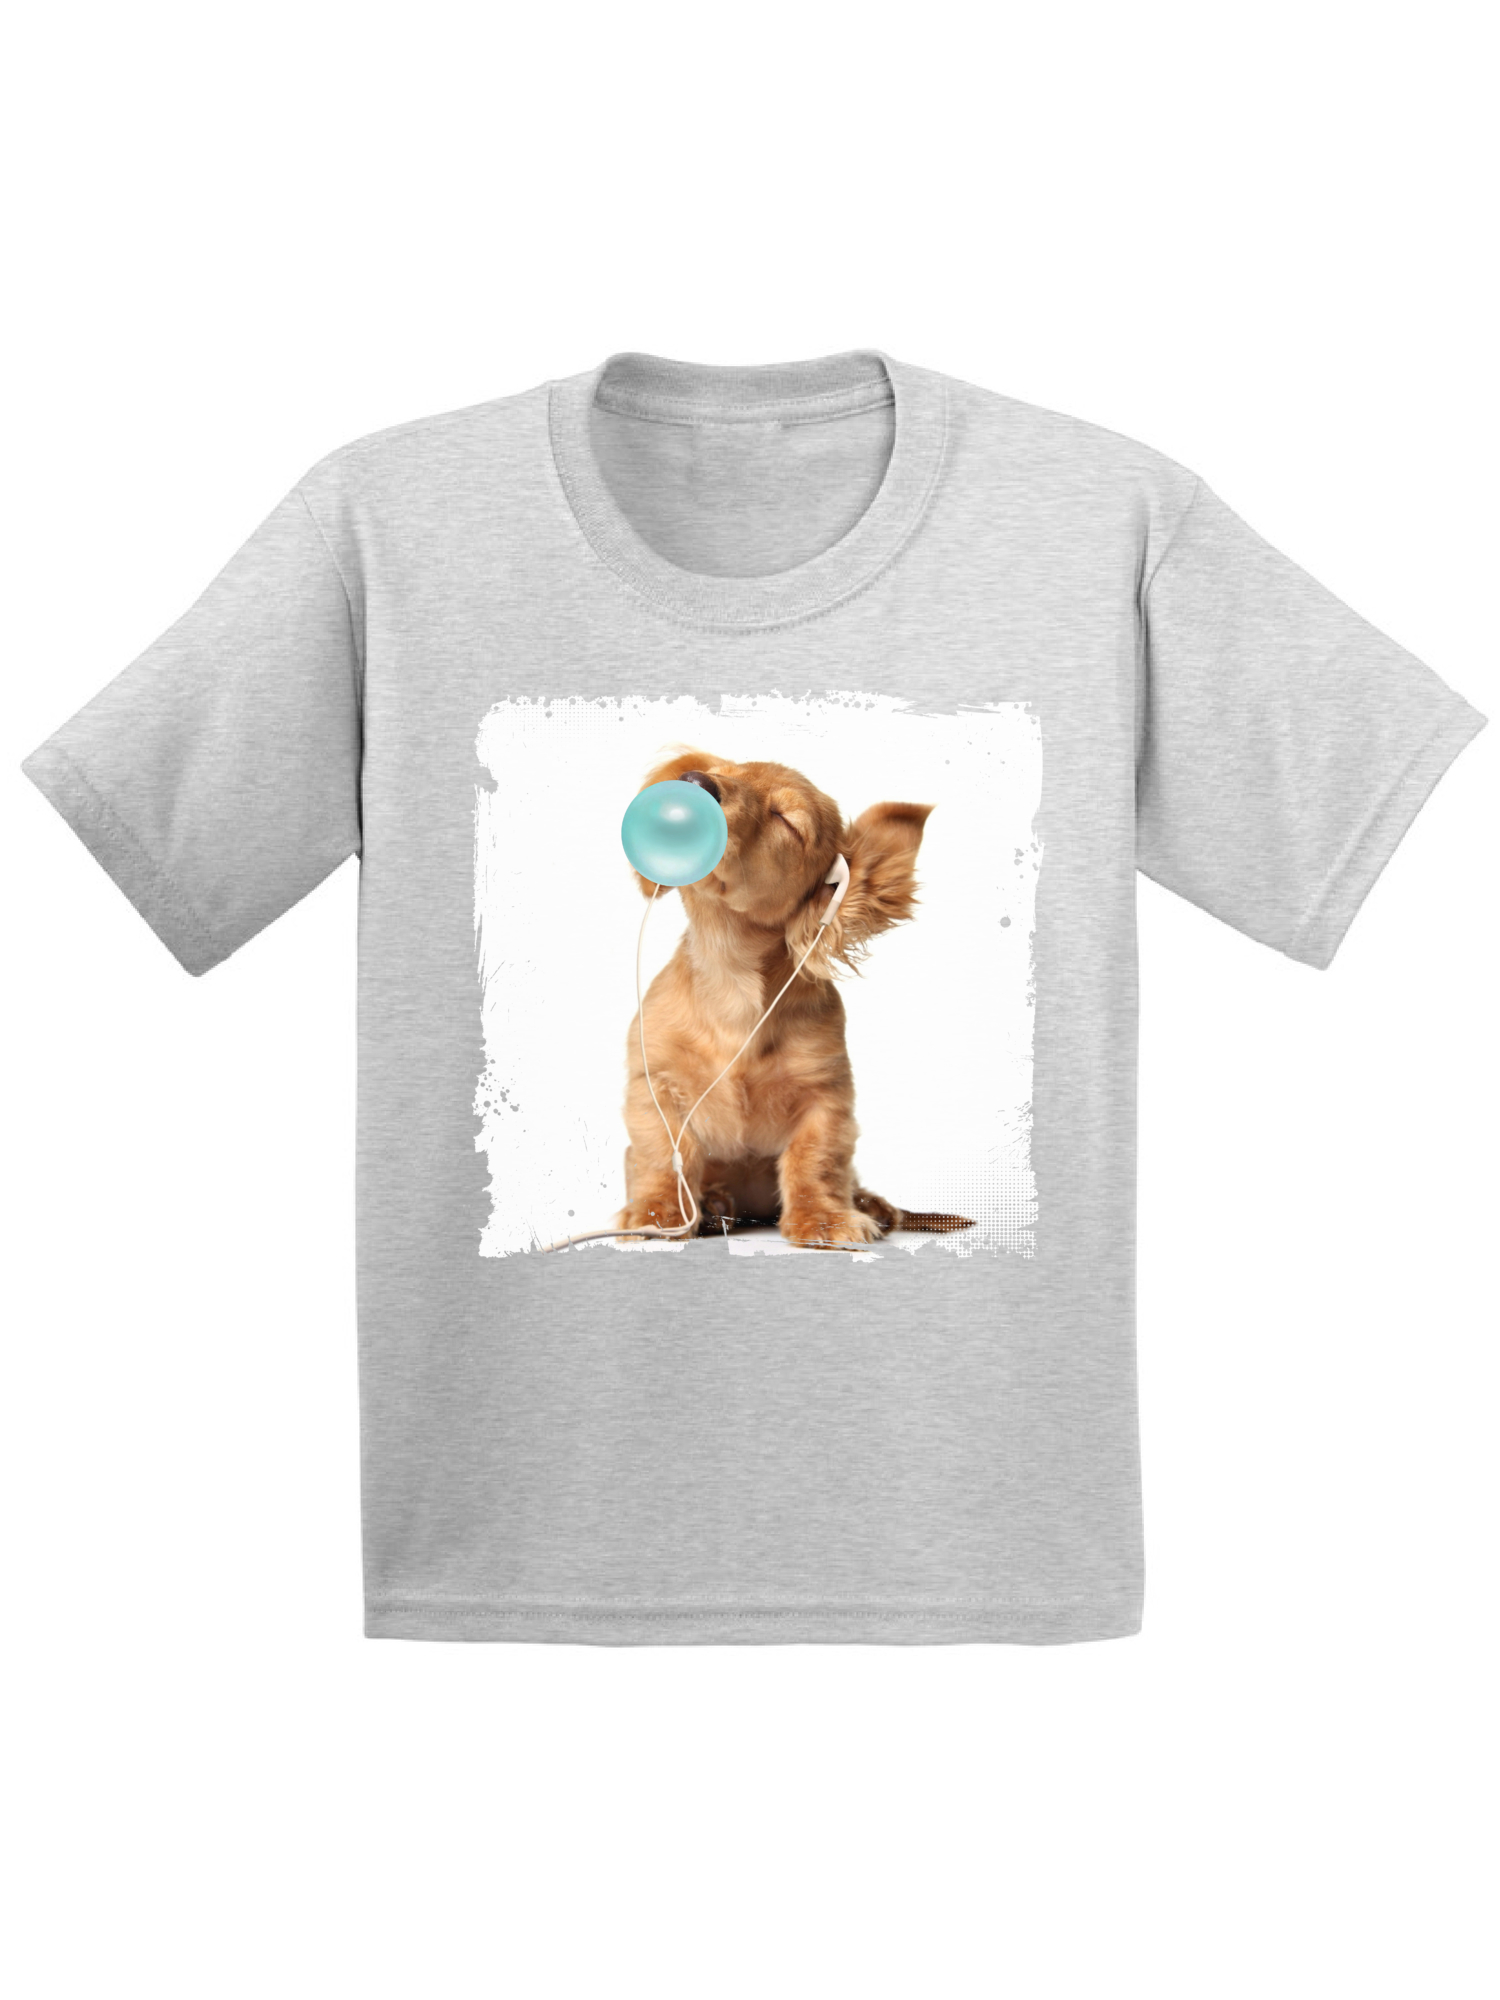 Awkward Styles Dog Outfit Cute Animal Collection Funny Puppy Dog with Gum Puppy Clothing Puppy Lovers Funny Gifts for Kids Puppy for Kids Dog Tshirt Puppy Dog Toddler Shirt Toddler T Shirt Kids - image 1 of 4